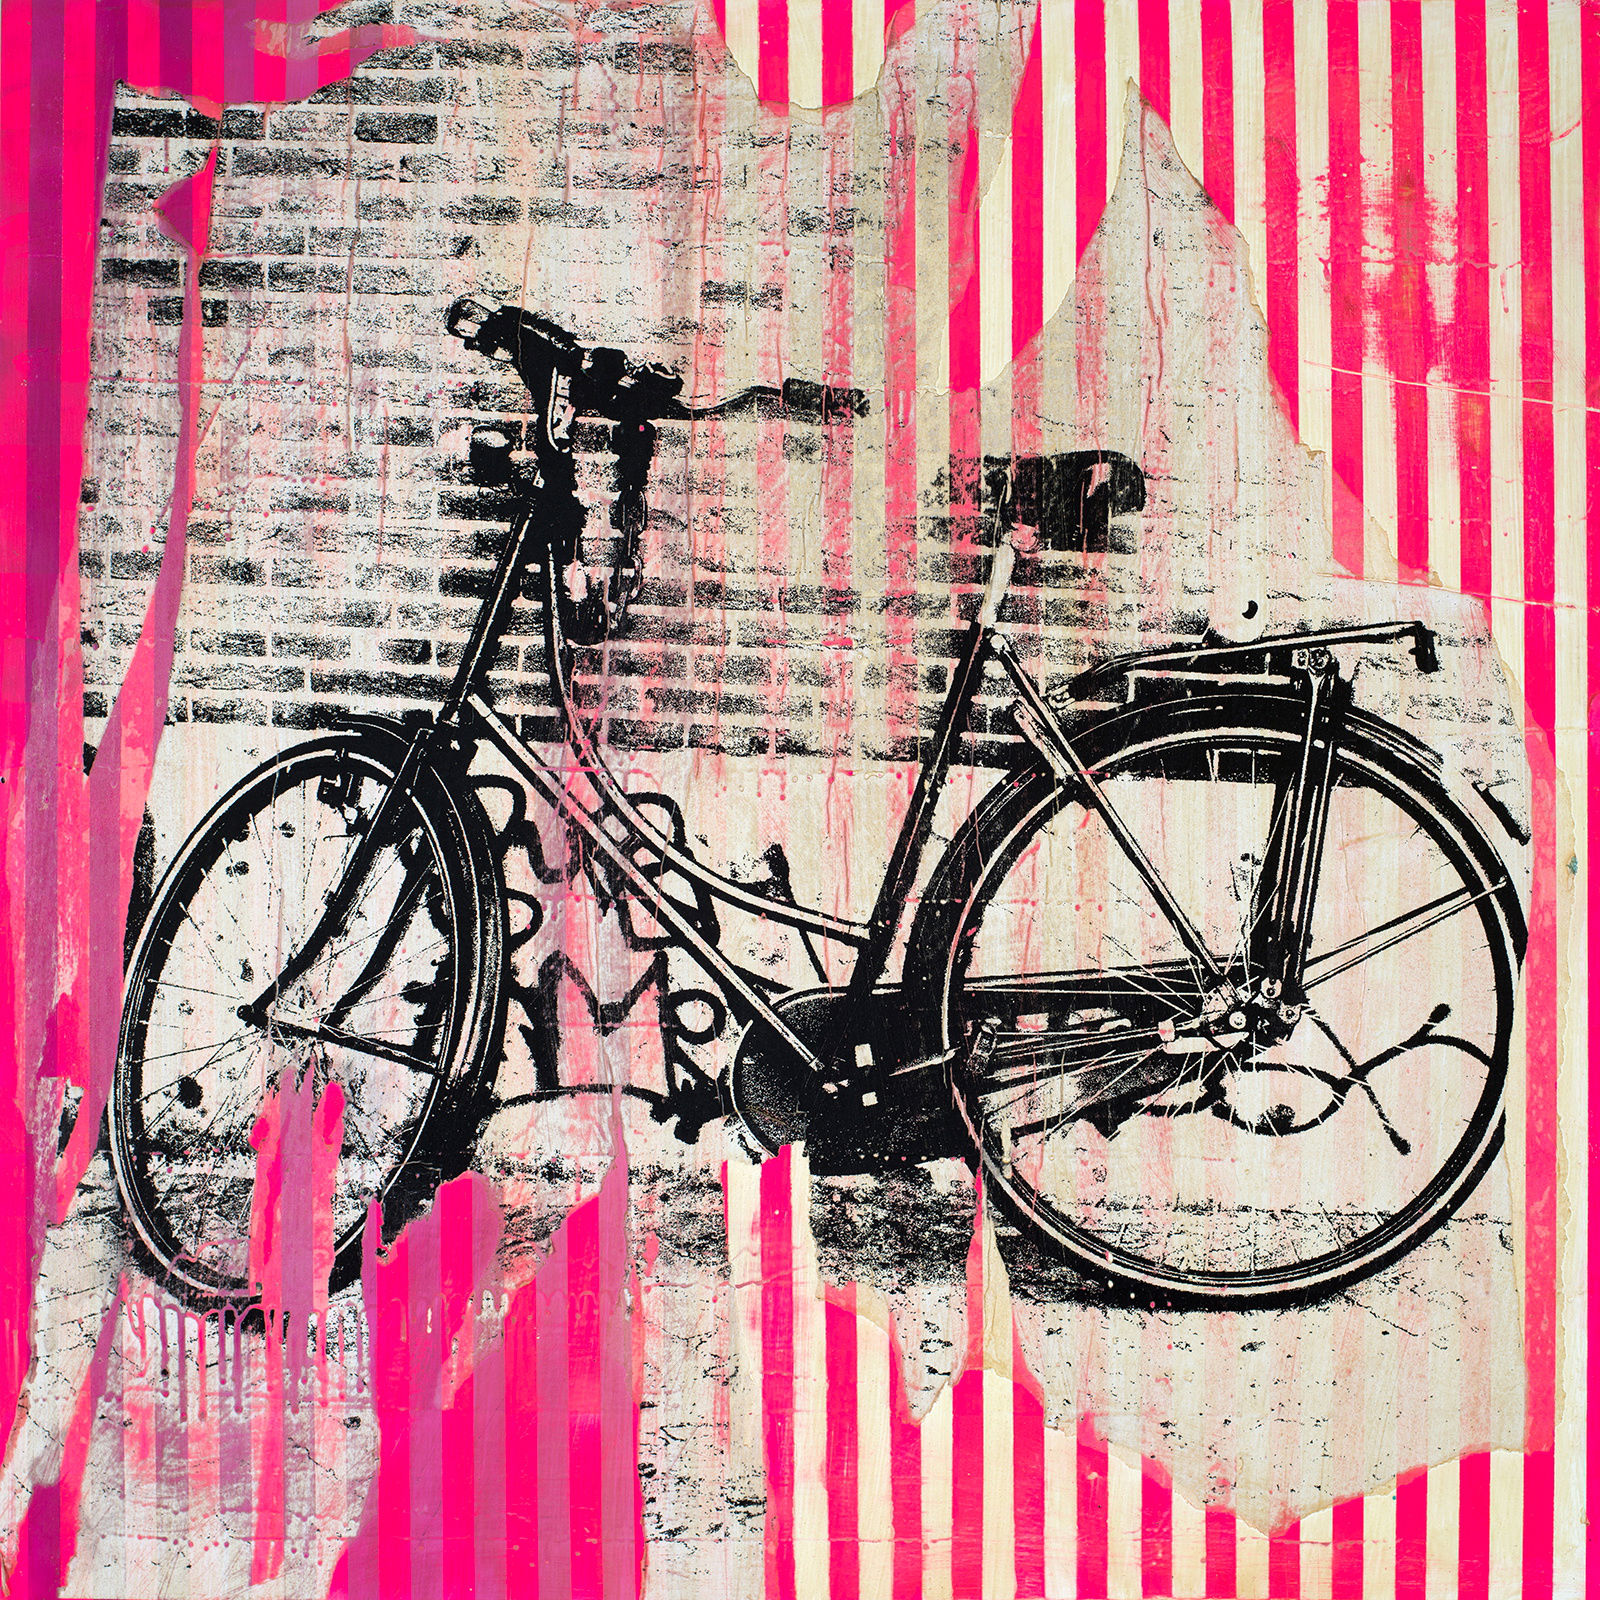 A painting of a bike in Amsterdam against a graffiti covered wall. The painting has sold.